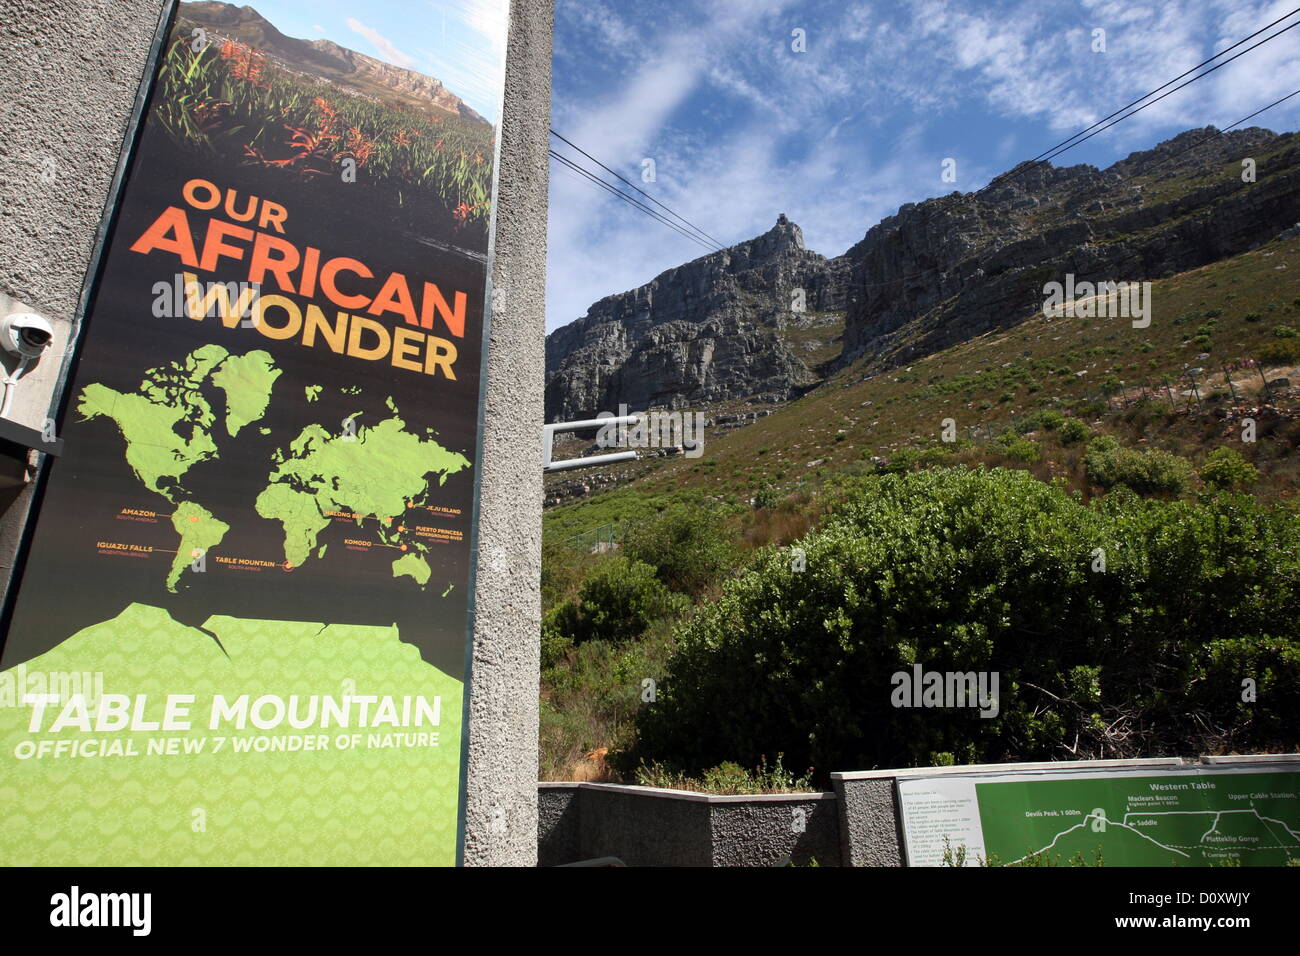 CAPE TOWN, SOUTH AFRICA: The cableway at Table Mountain on November 29, 2012, in Cape Town, South Africa. Table Mountain is officially one of the New 7 Wonders of Nature. (Photo by Gallo Images / Sunday Times / Esa Alexander) Stock Photo